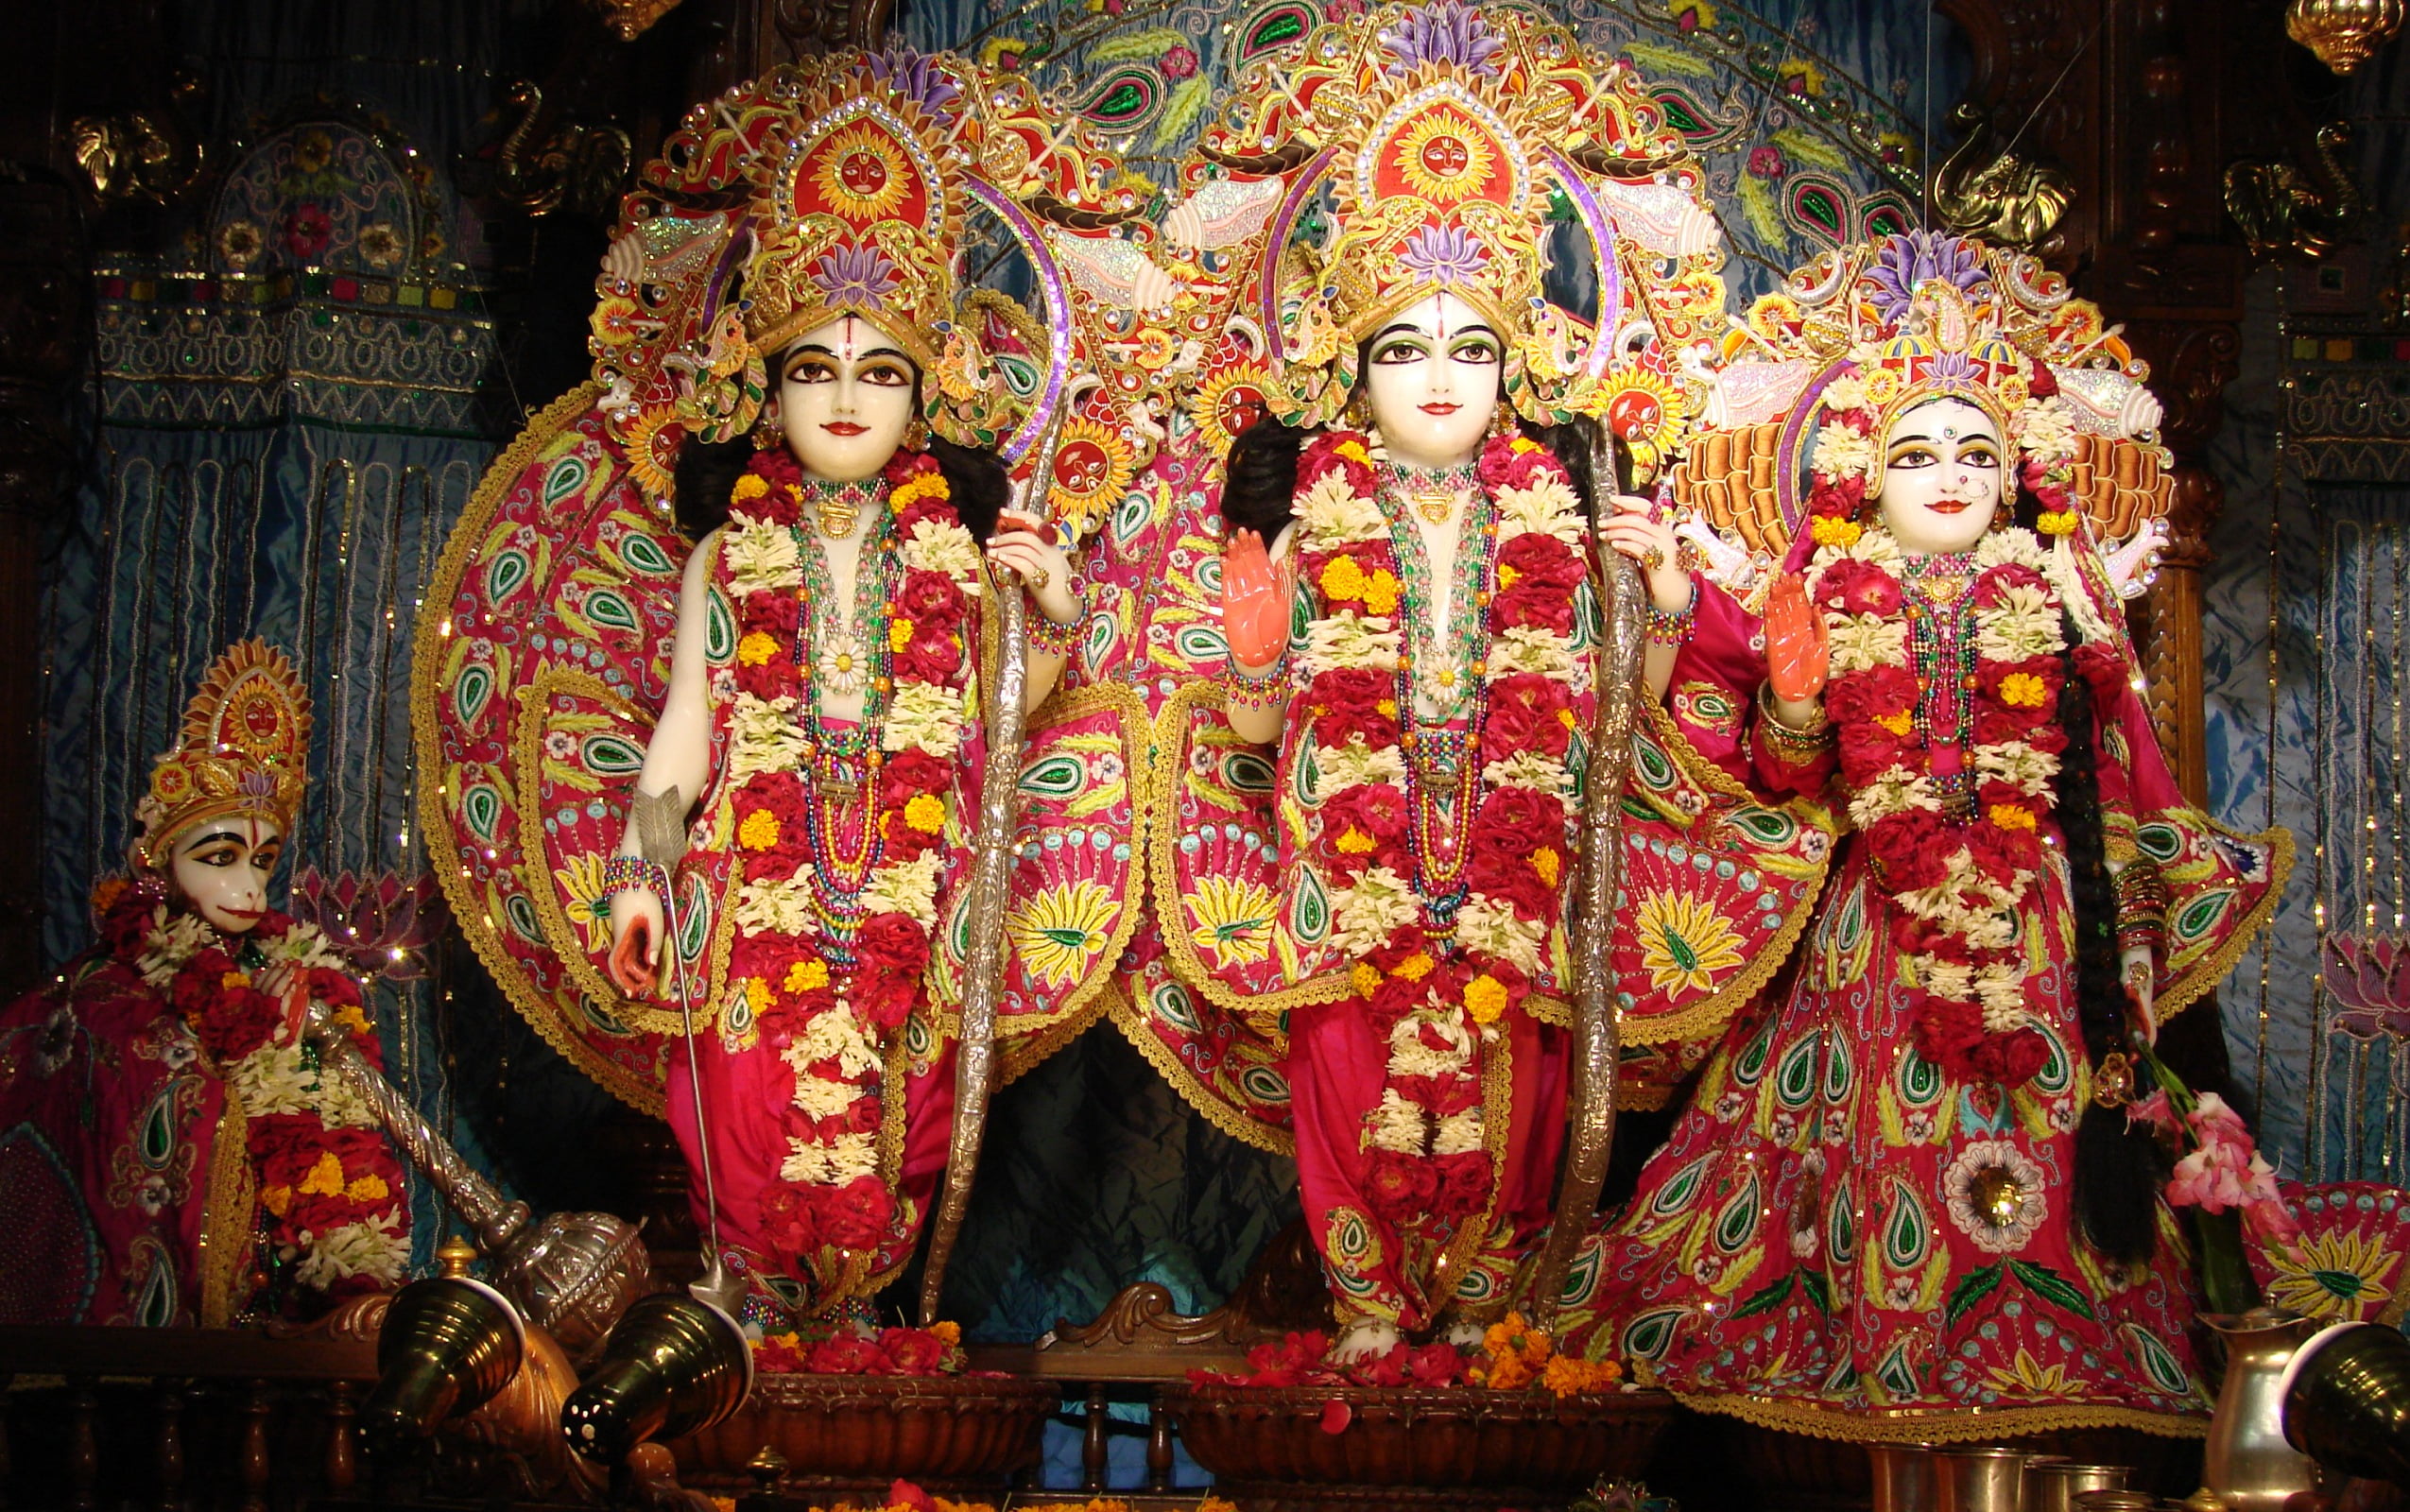 Lord Rama With Sita And Lakshmana, red and yellow garlands, God